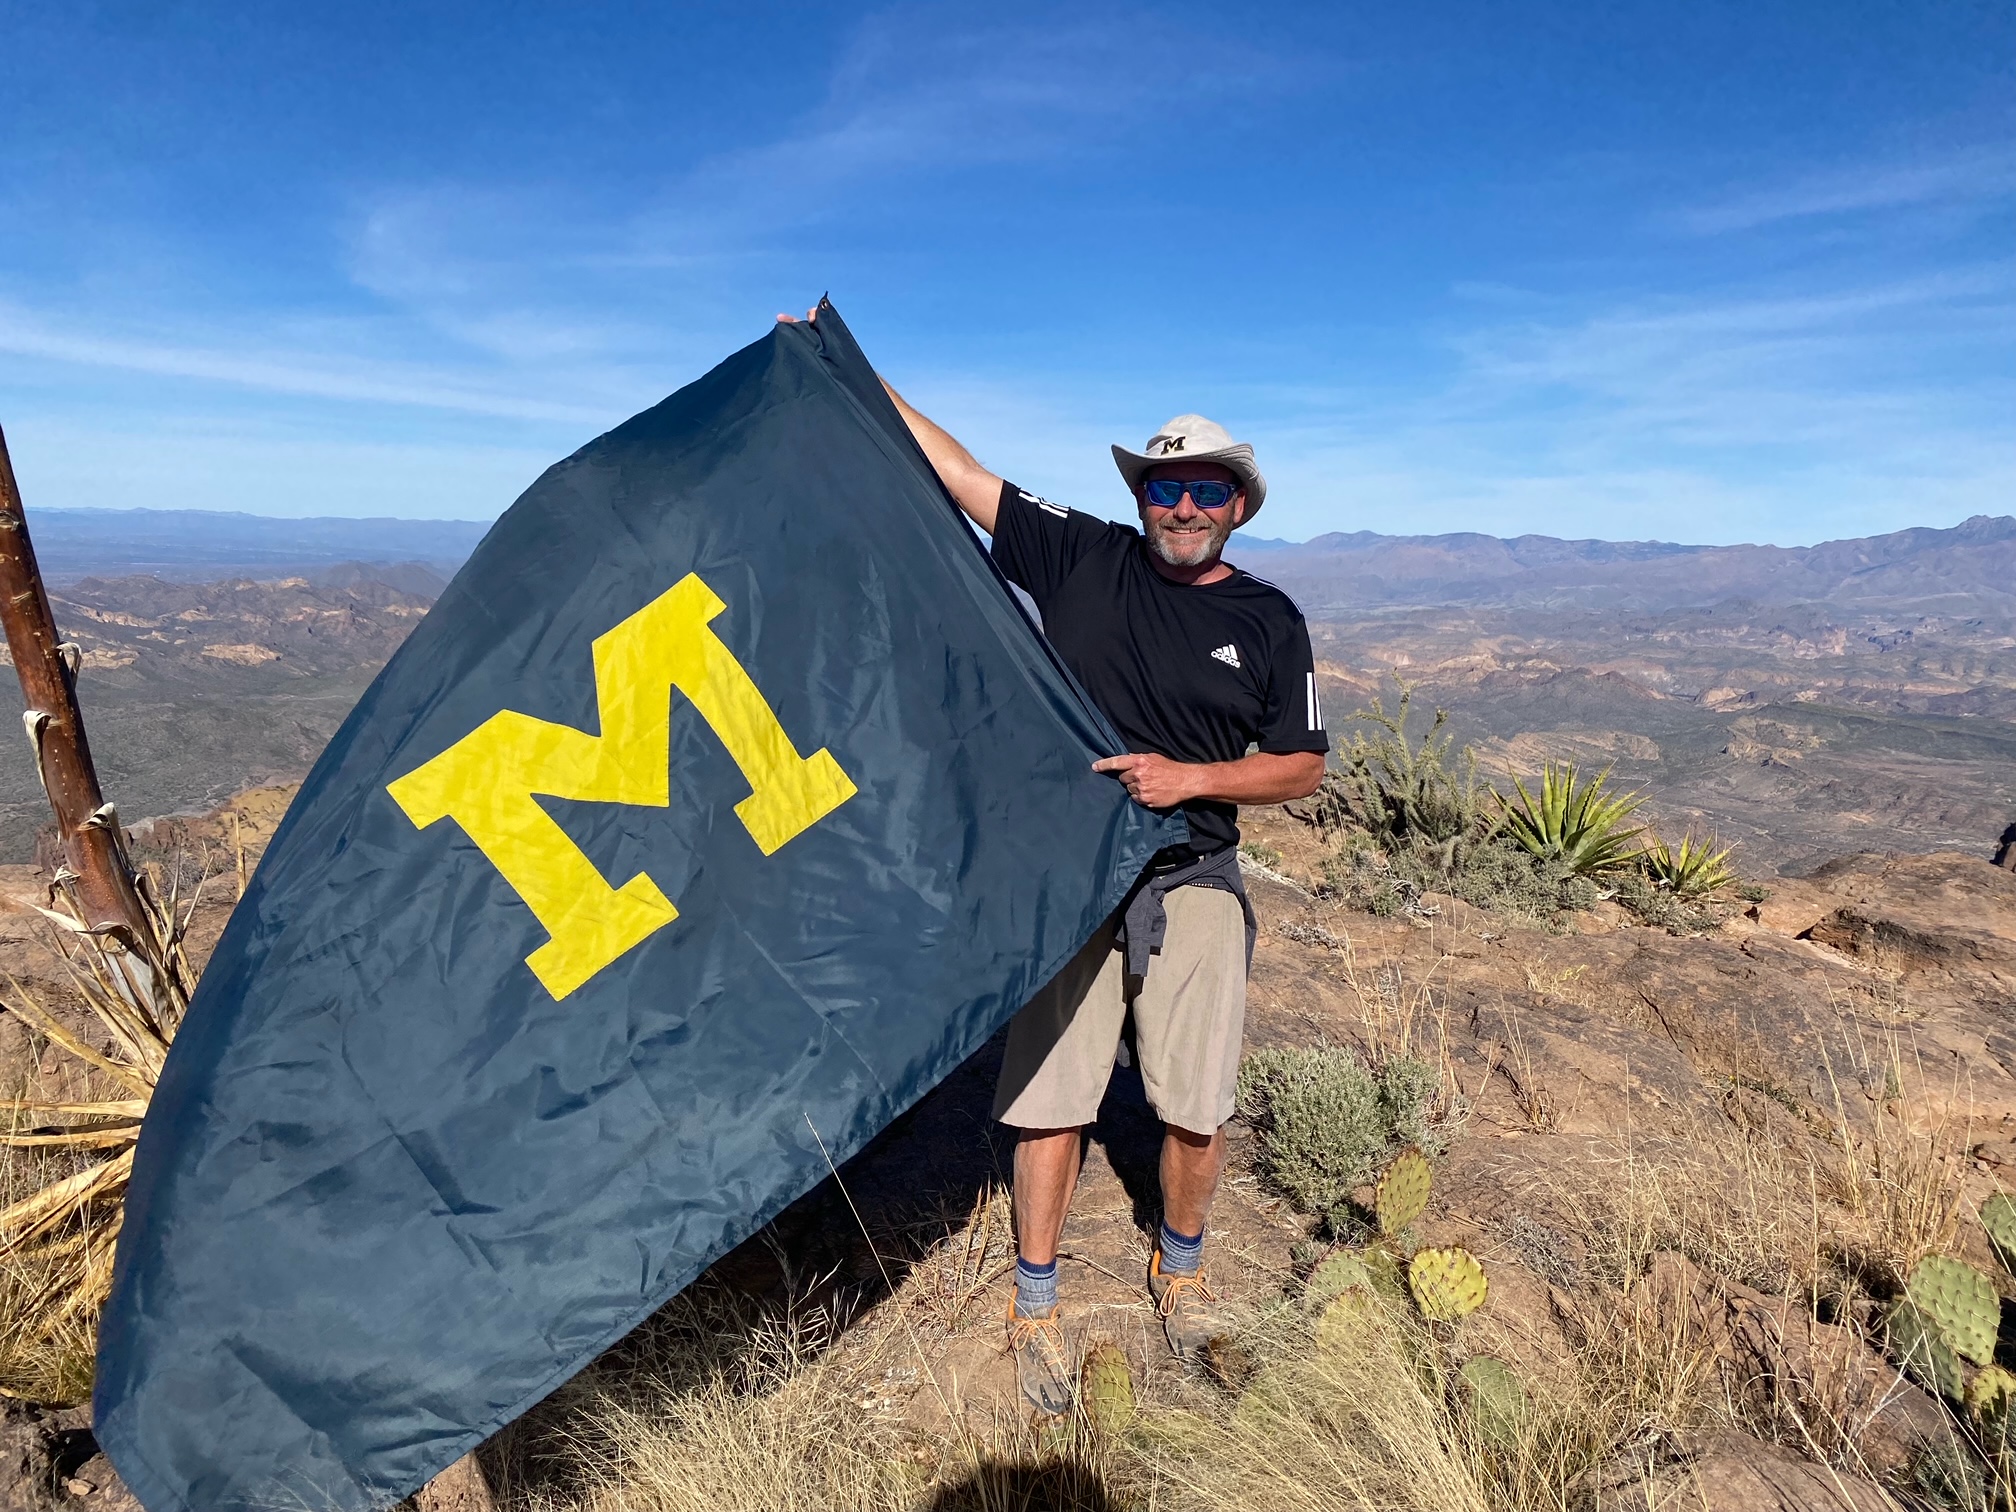 Andrew Kneisel, ’87, took the Maize and Blue with him as he hiked to the Flatiron in Apache Junction, Arizona, in December.